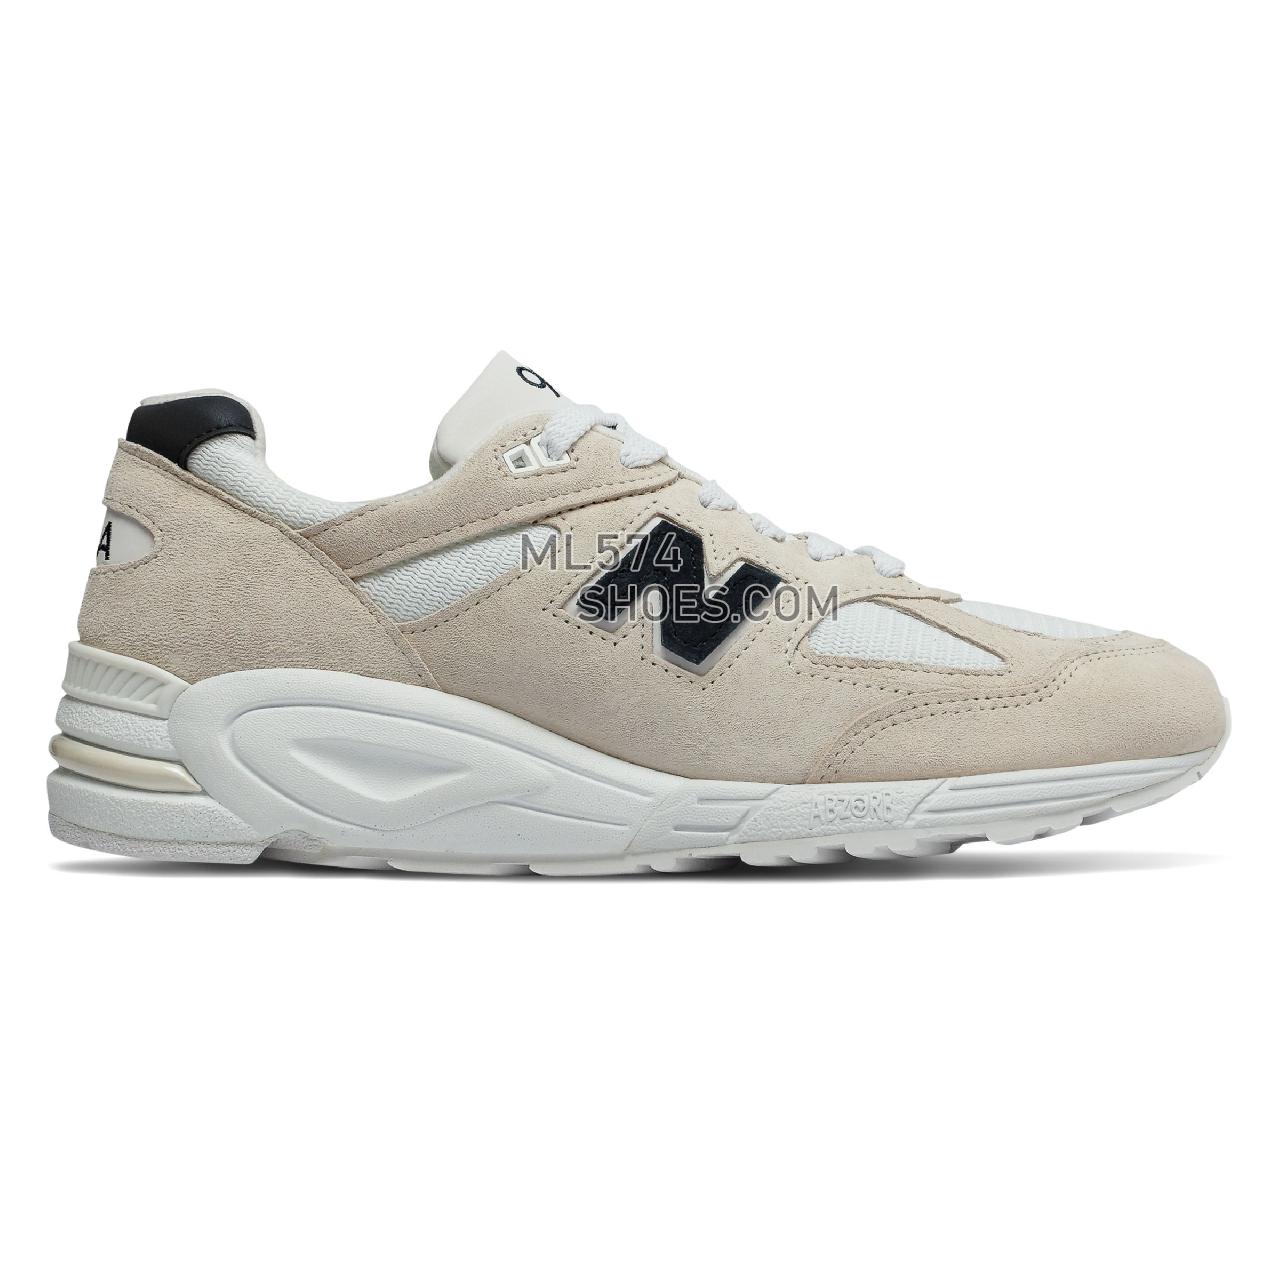 New Balance Mens 990v2 Made in US - Men's 990 - Classic Angora with White and Black - M990WE2